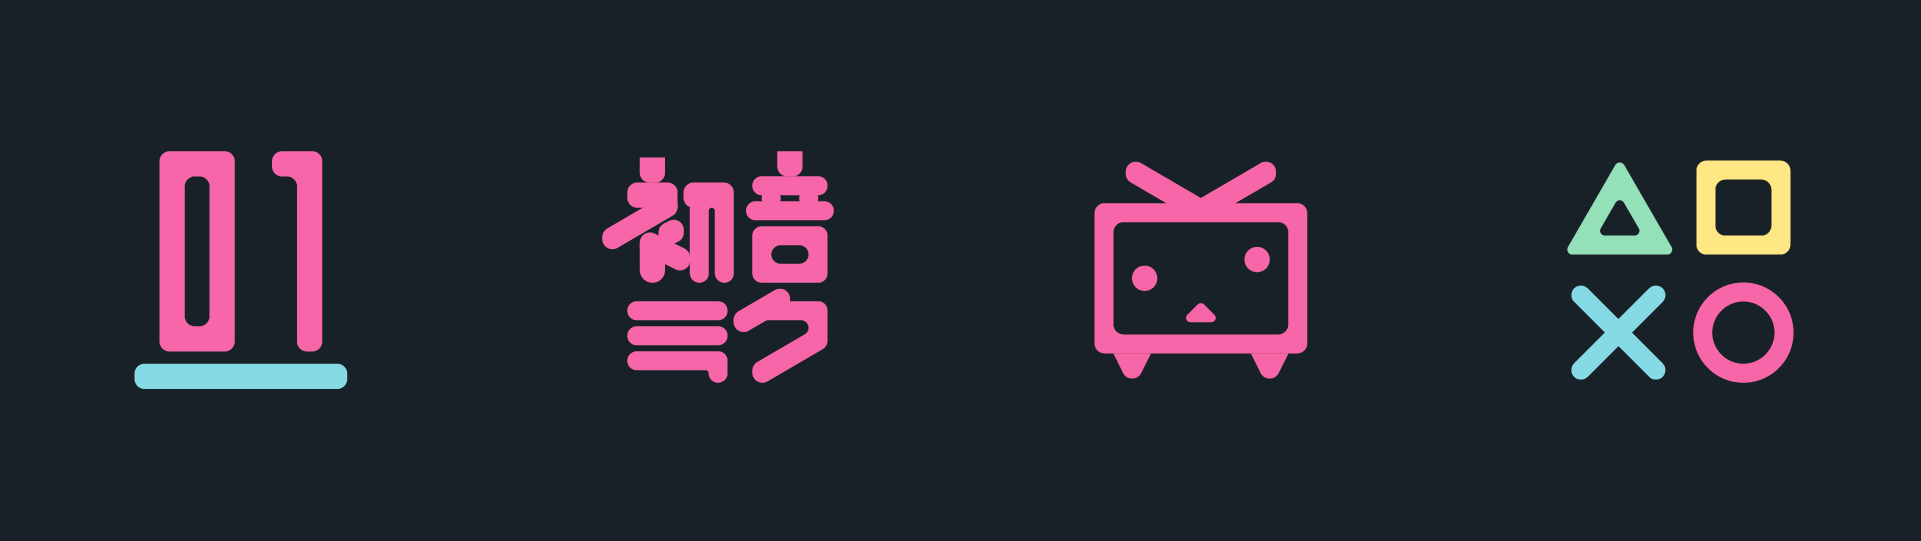 Scrapped Icons